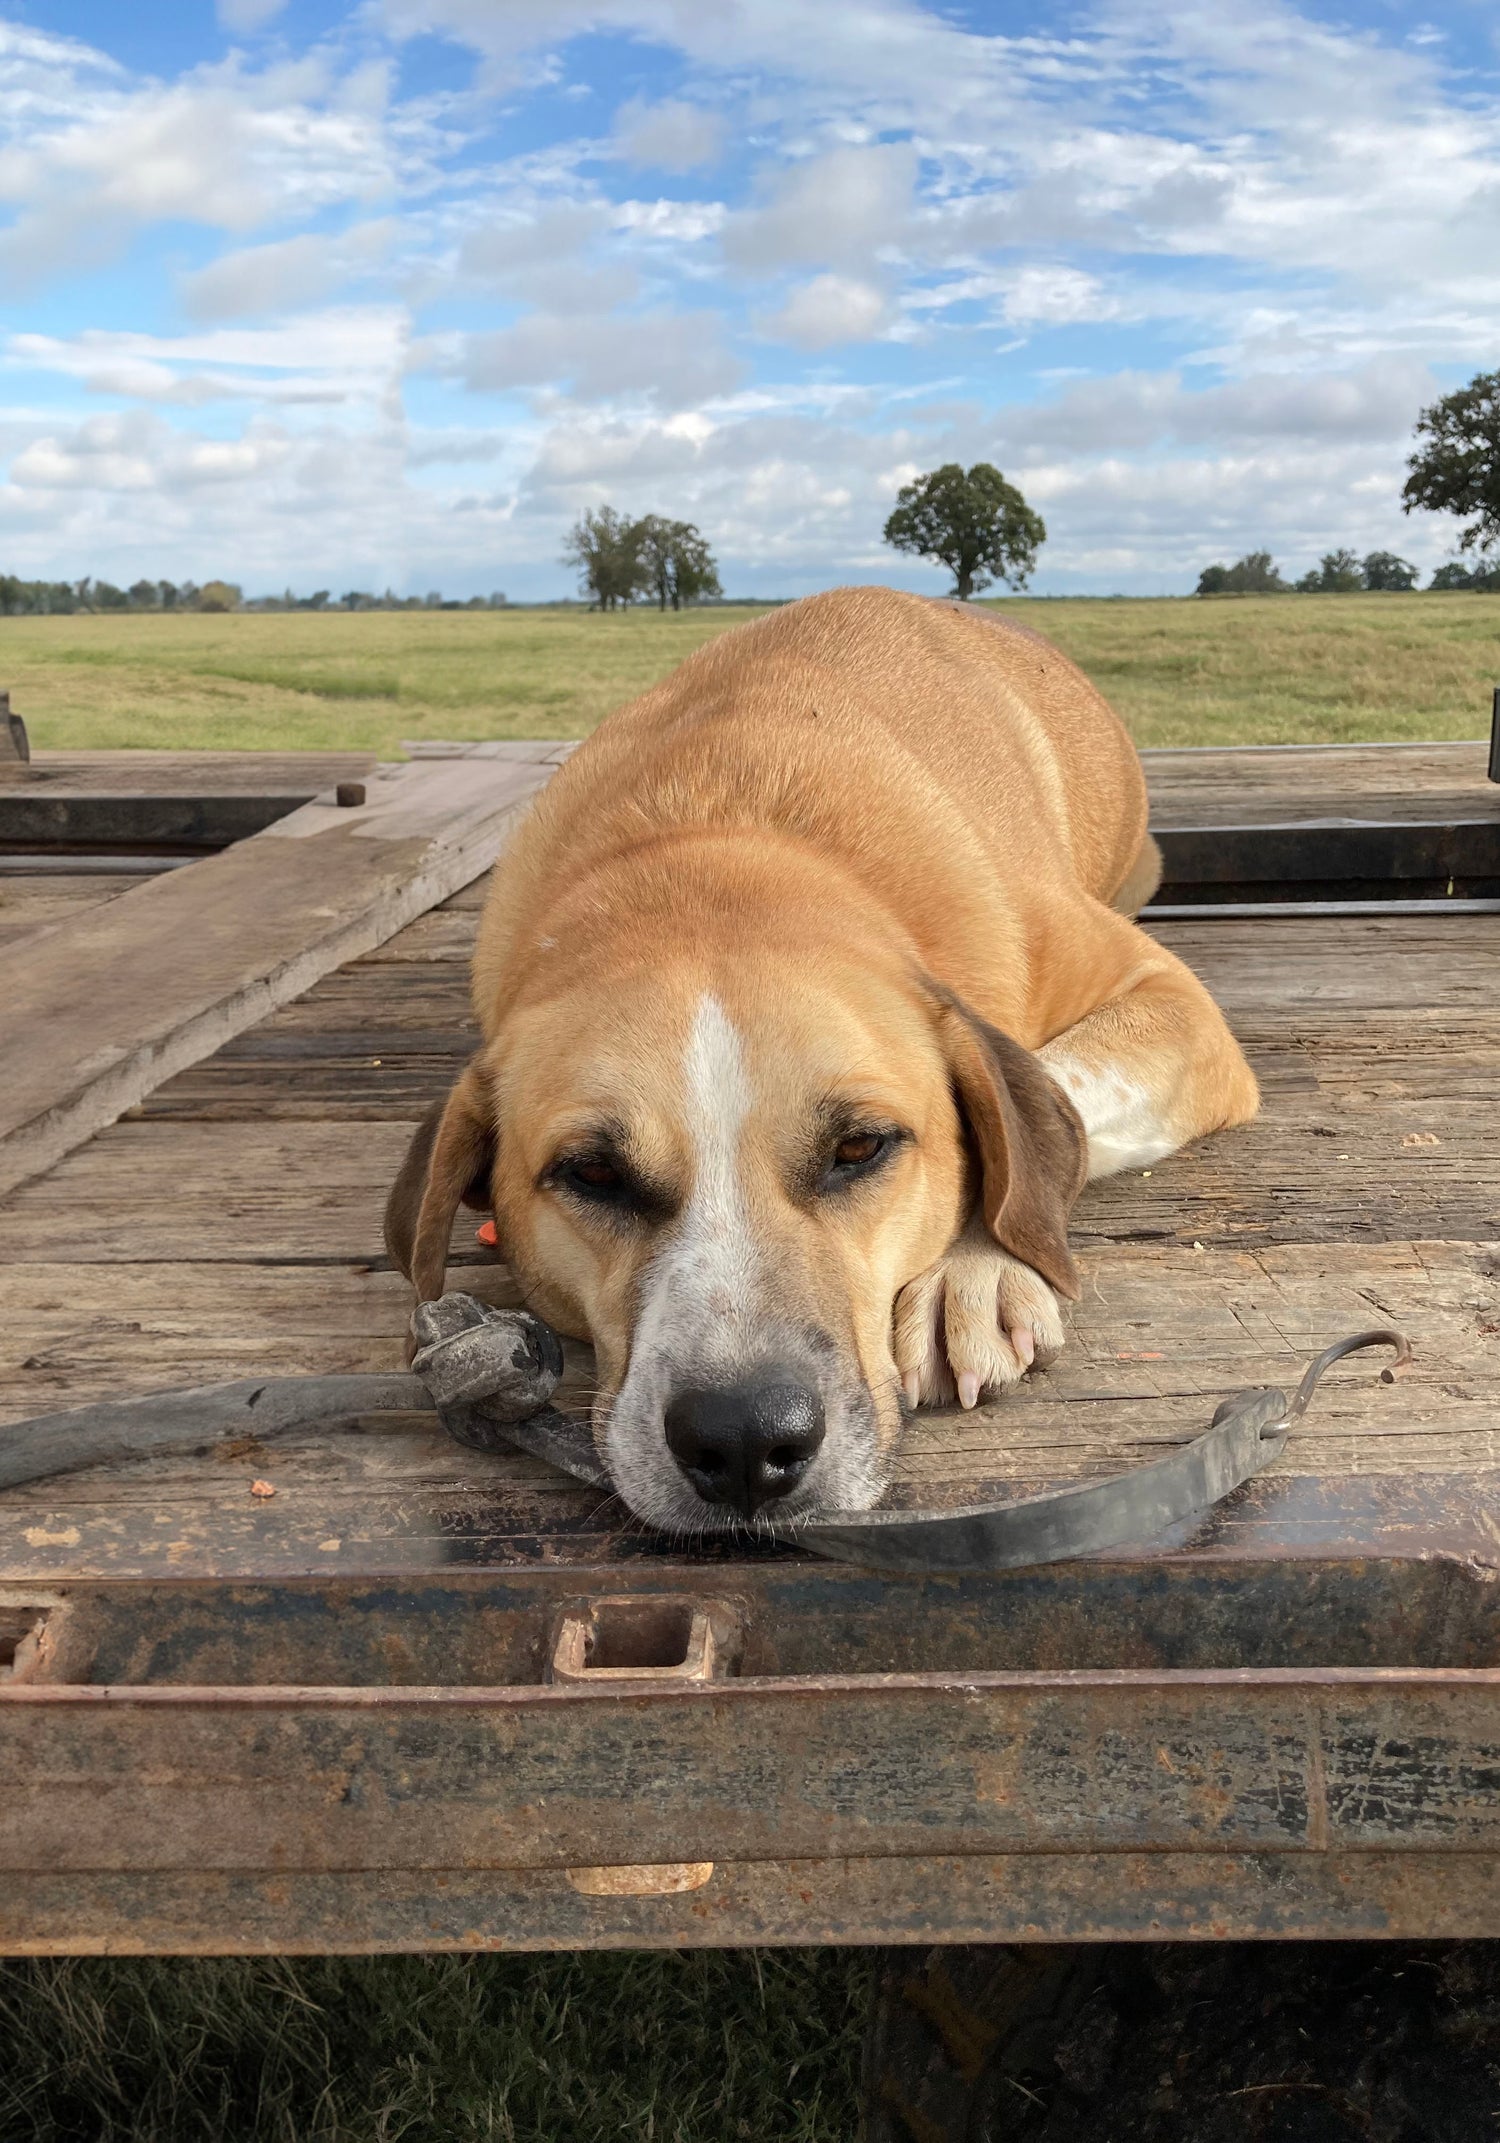 Tan dog on a wooden platform in a field